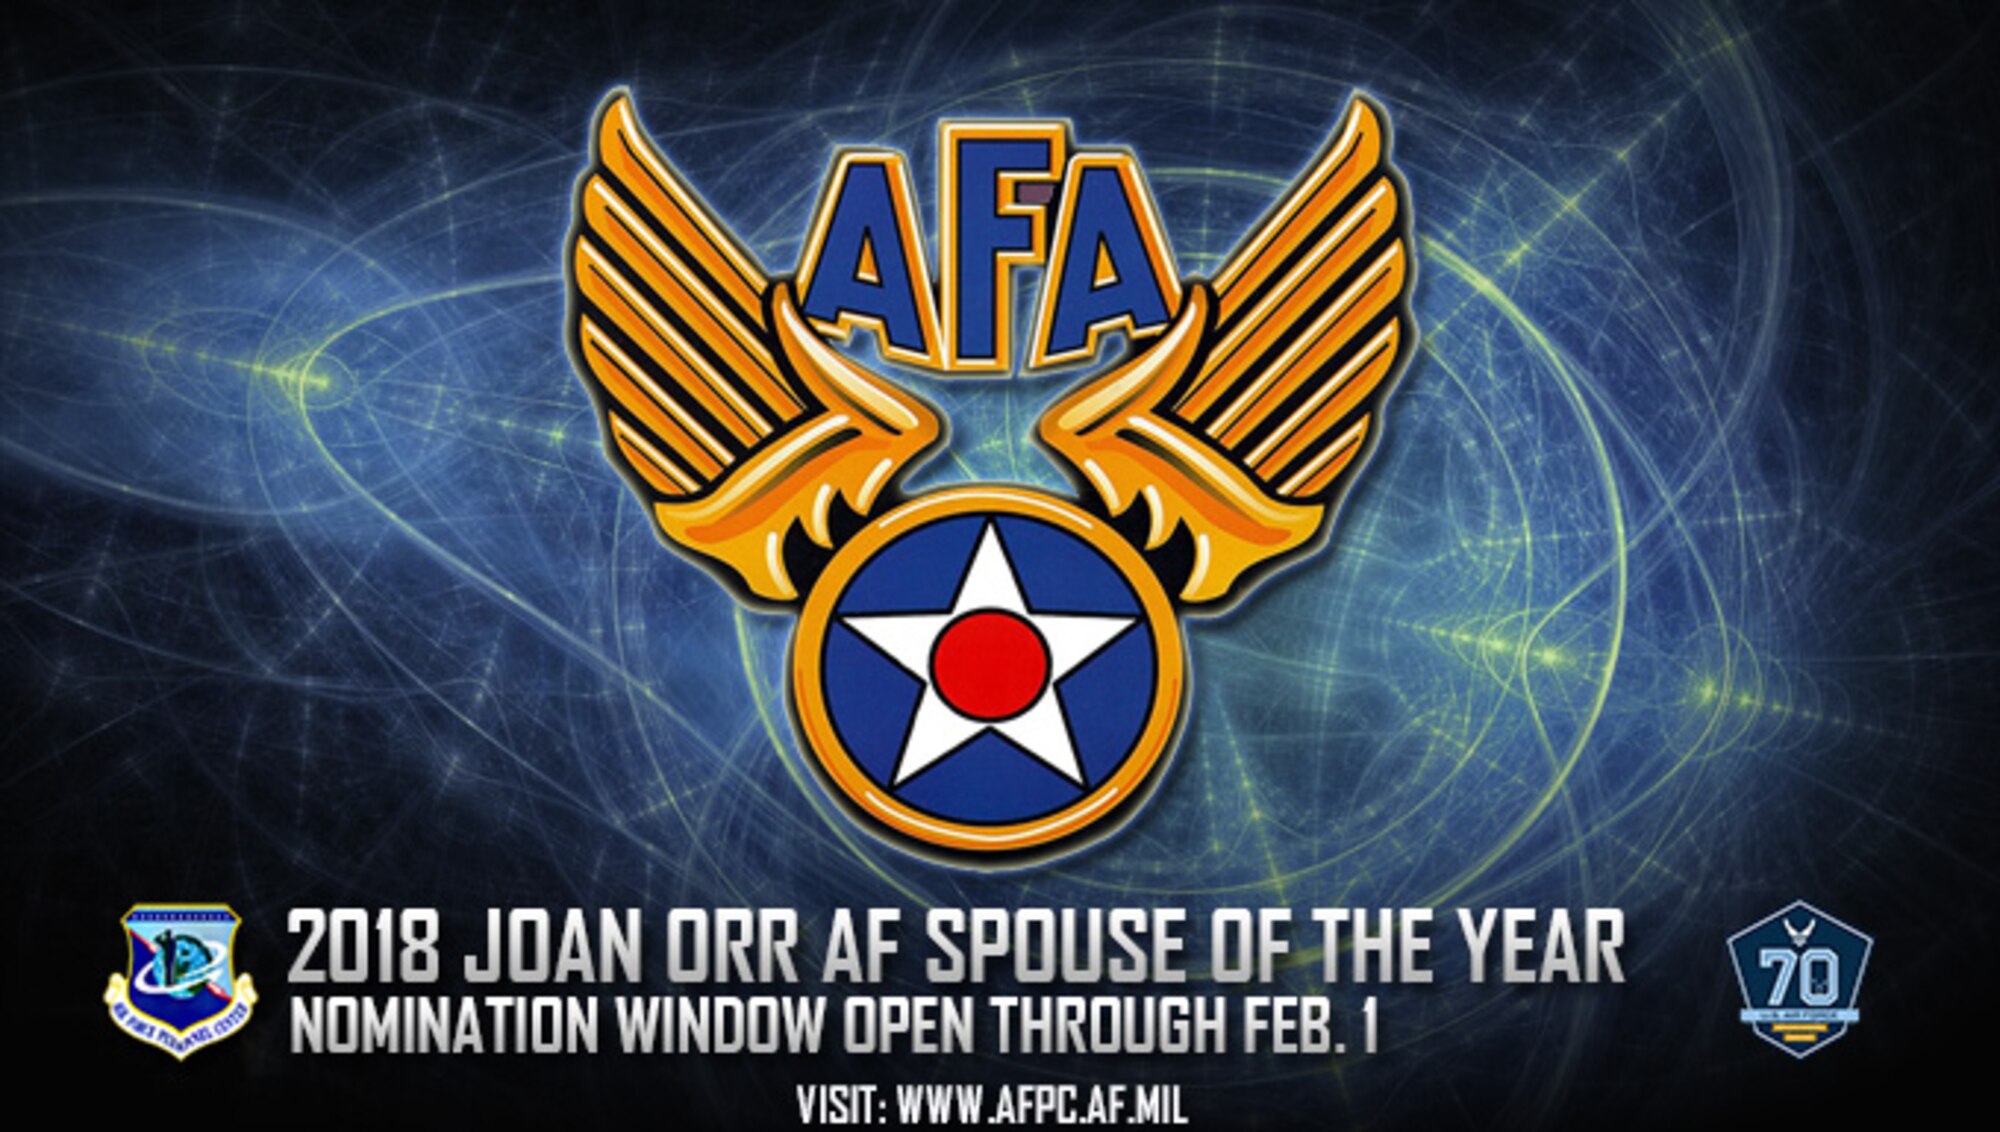 Air Force officials are currently accepting nominations for the Joan Orr Air Force Spouse of the Year Award through Feb. 1, 2018. This award honors significant contributions made by non-military spouses of Air Force military members. (U.S. Air Force graphic)